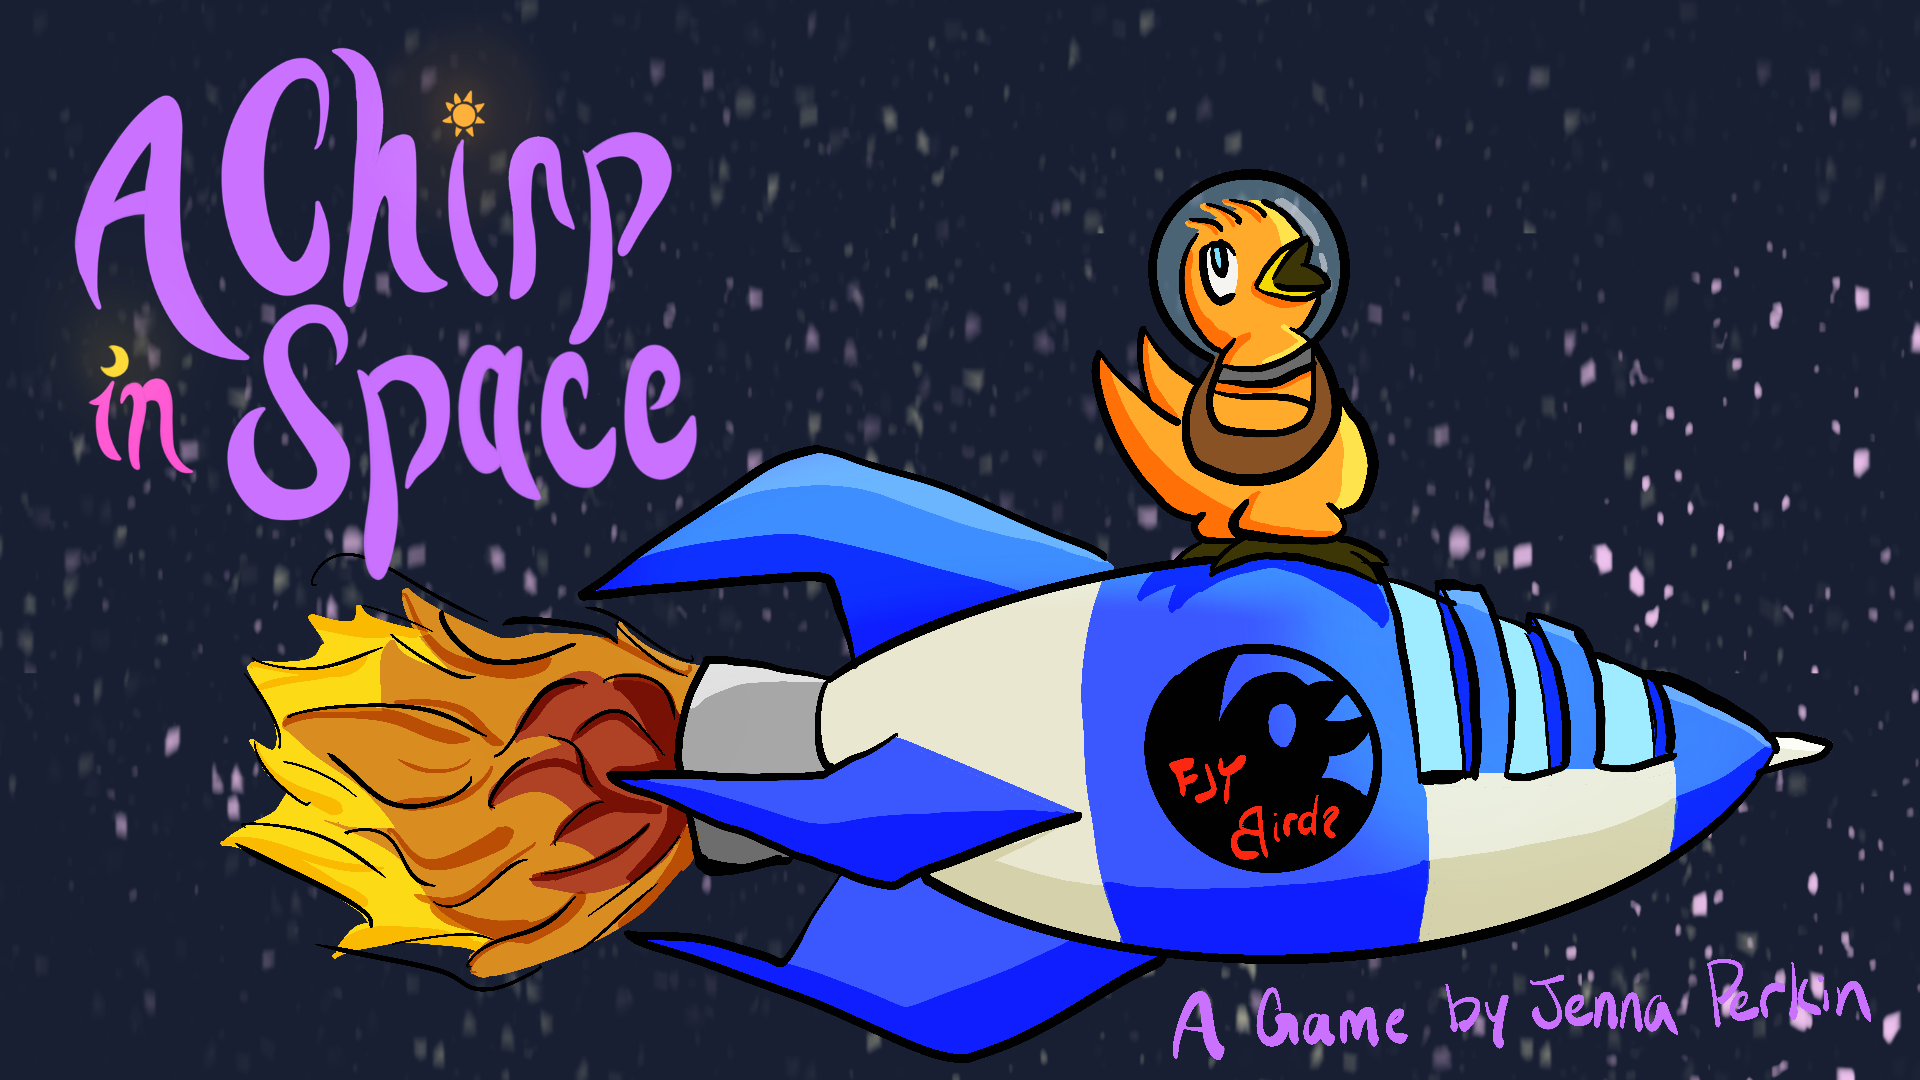 A Chirp in Space